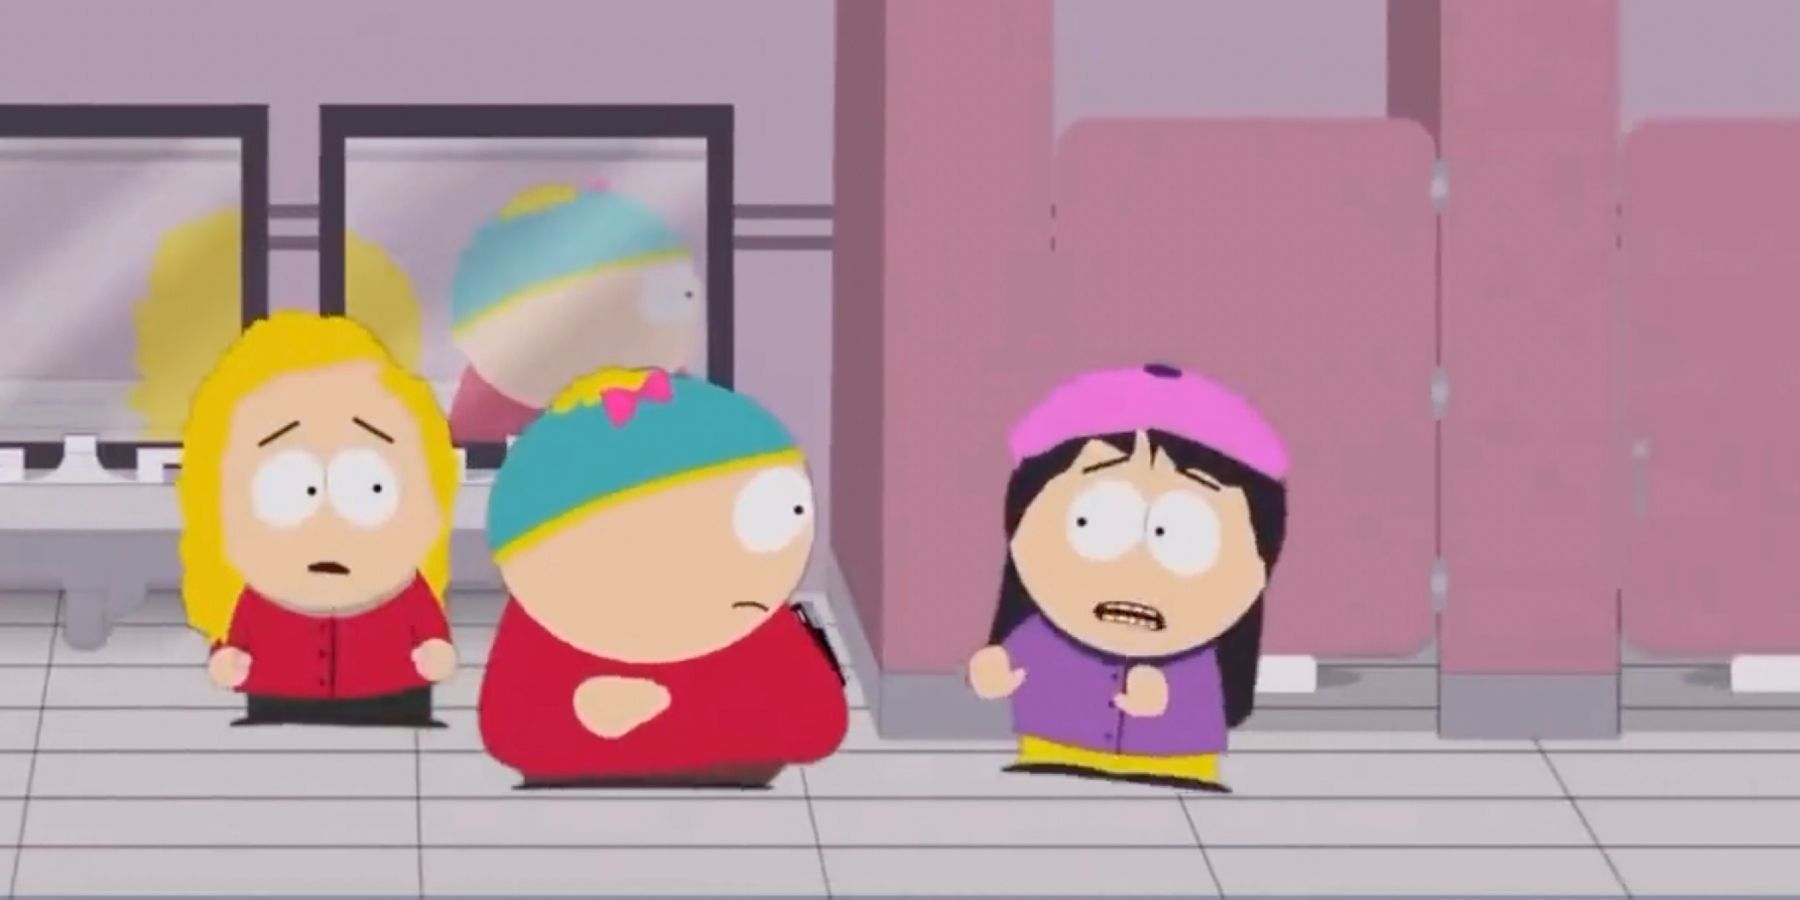 Eric Cartman tries to bypass Wendy Testaburger to use the women's bathroom in the South Park episode The Cissy